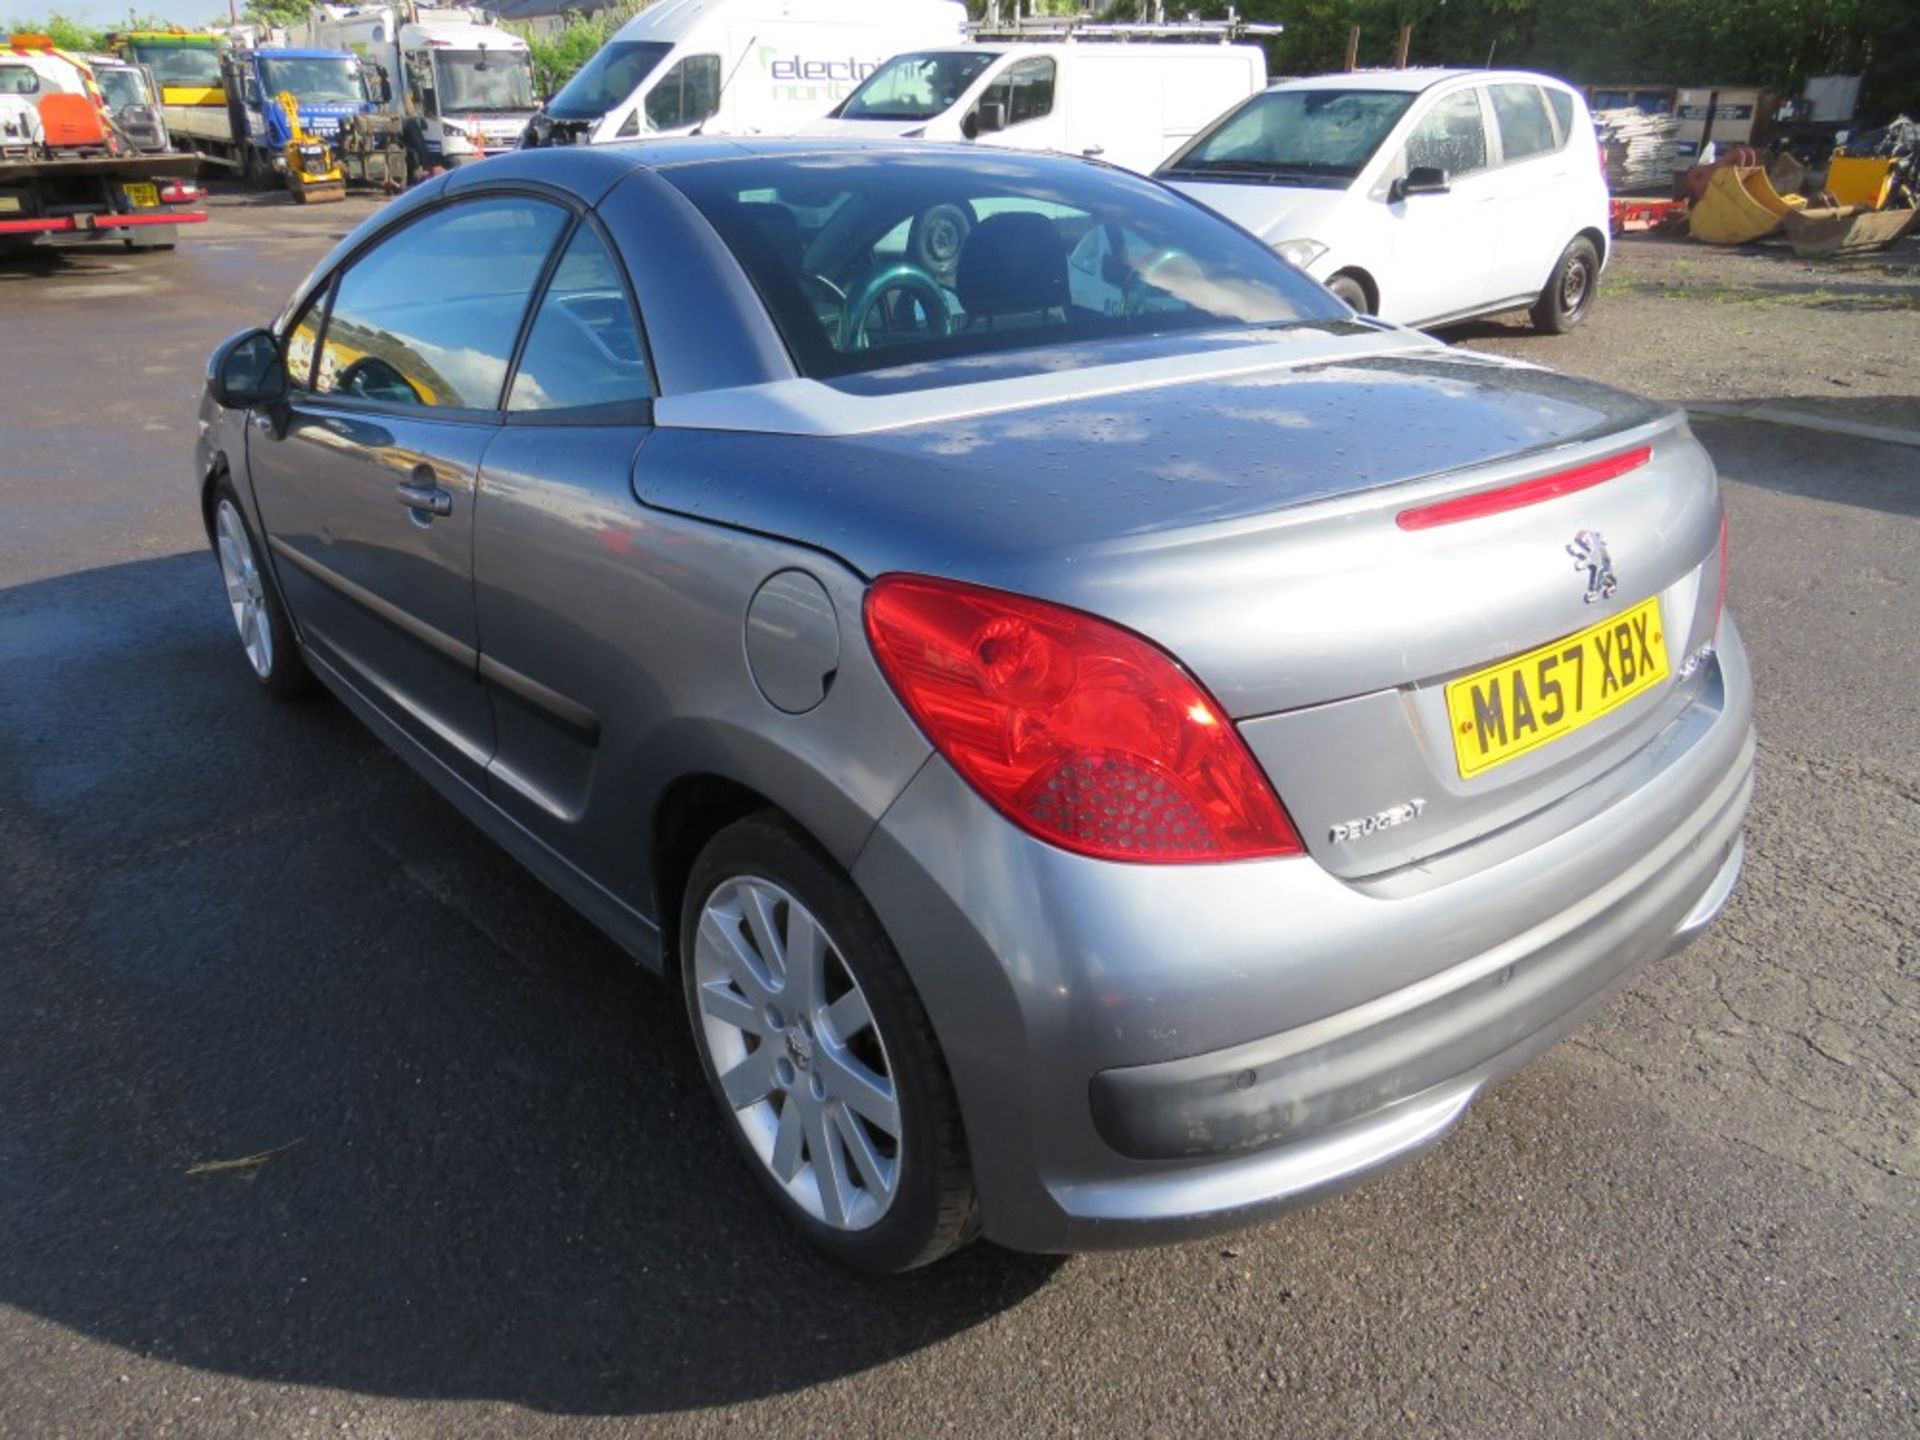 57 reg PEUGEOT 207 GT CC COUPE, 1ST REG 09/07, 113107M NOT WARRANTED, V5 HERE, 5 FORMER KEEPERS [ - Image 3 of 6